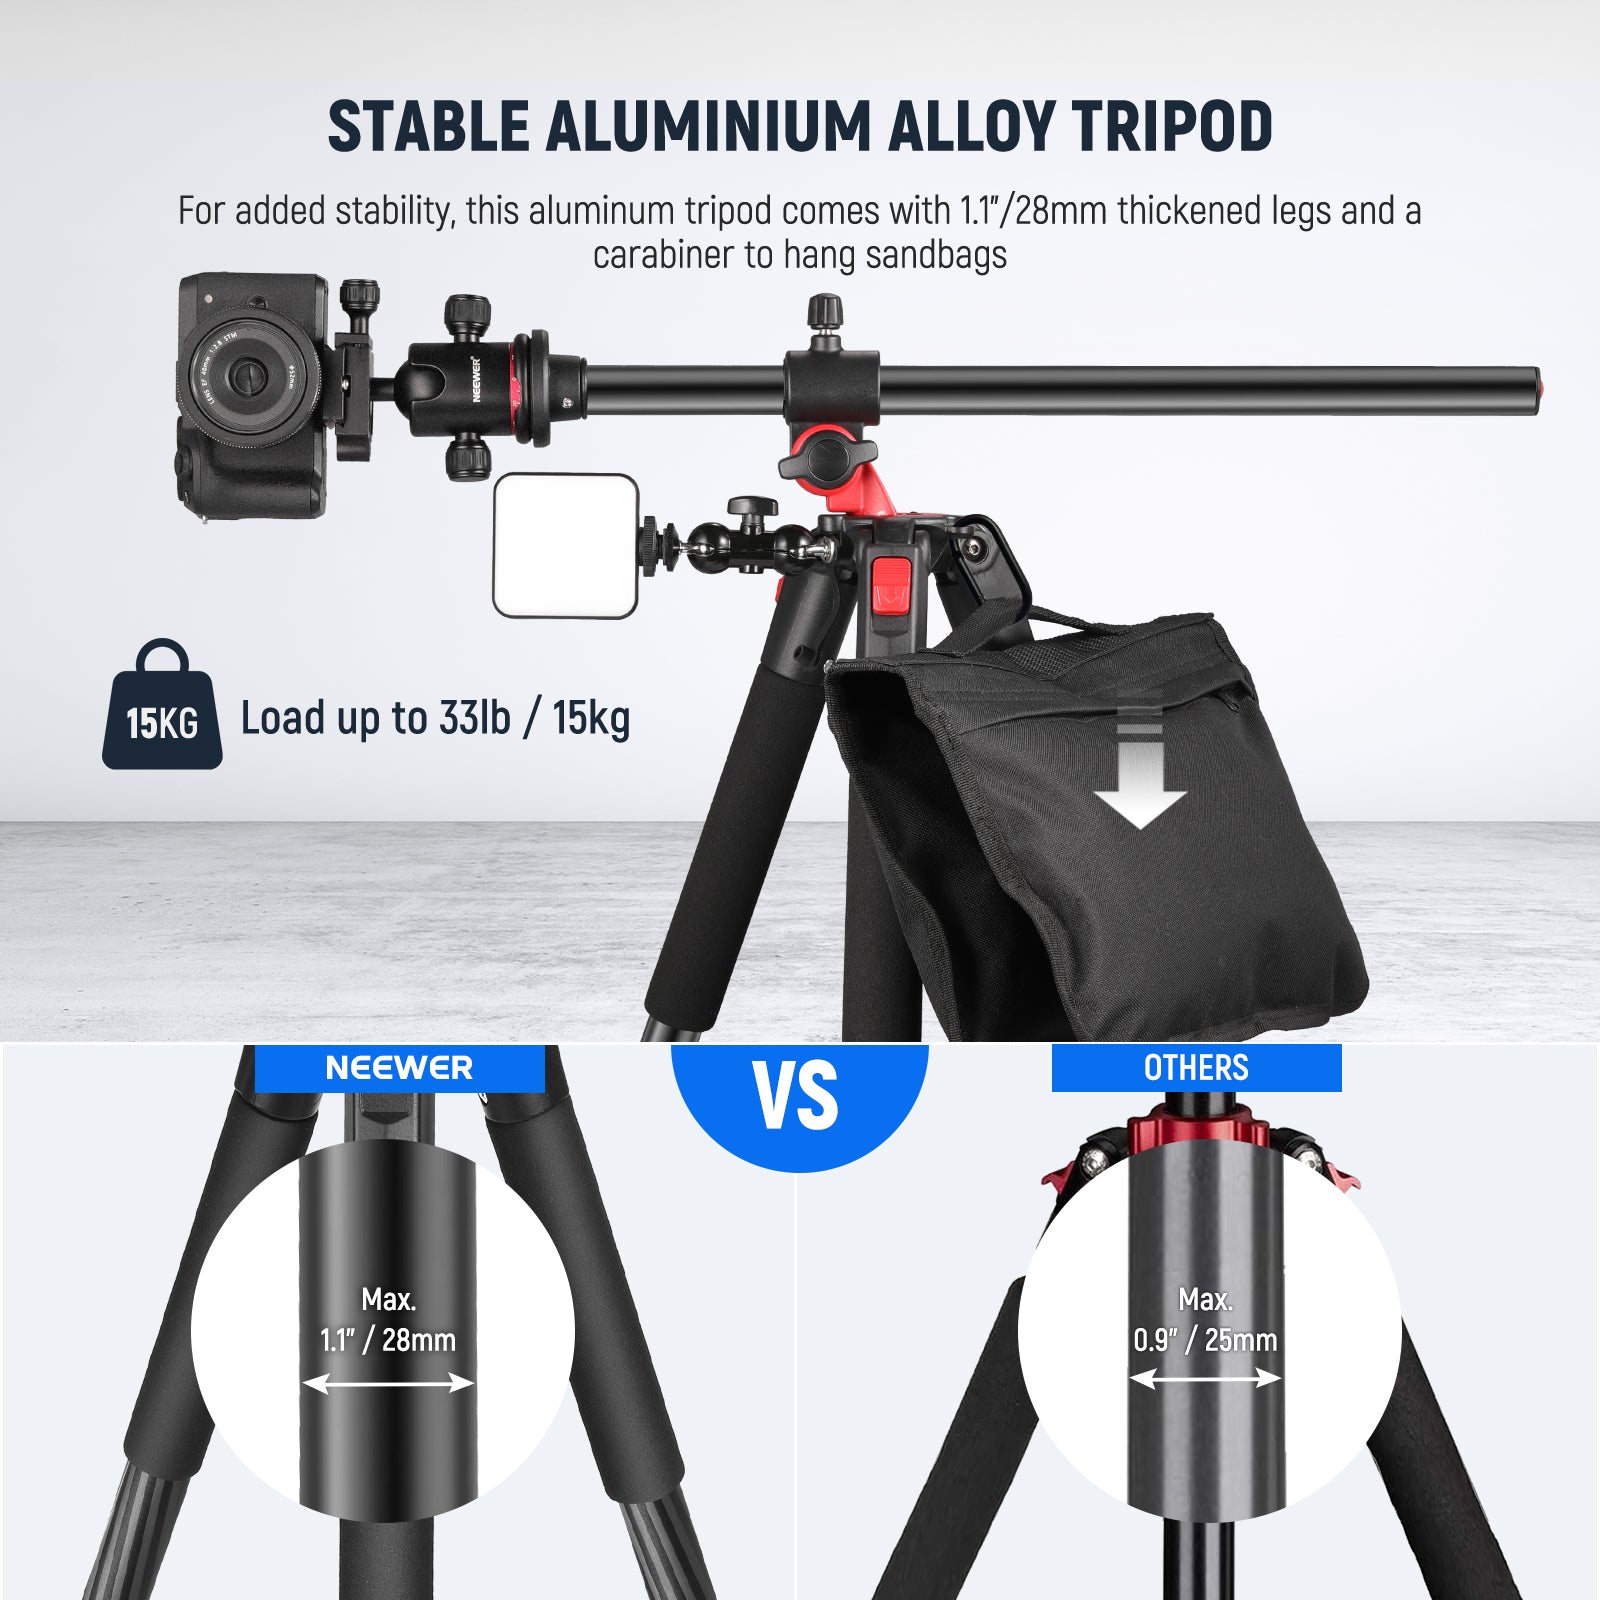 Monopod vs Tripod: Which One to Use?